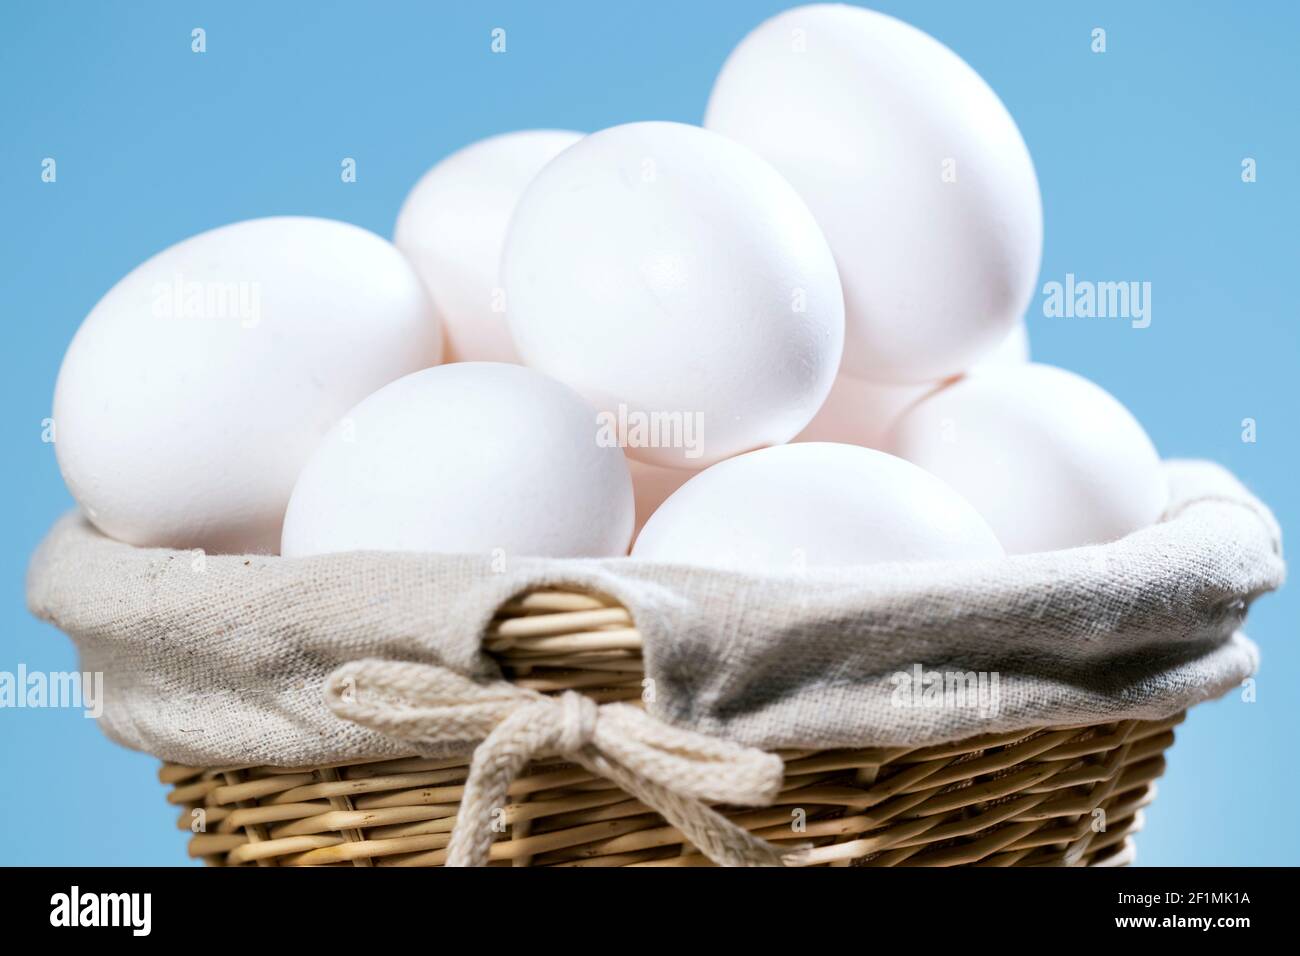 Chicken Eggs in a straw Basket, A lot of White Fresh Raw eggs in a container, Natural Eko Product, Easter preparing Copyspace Stock Photo